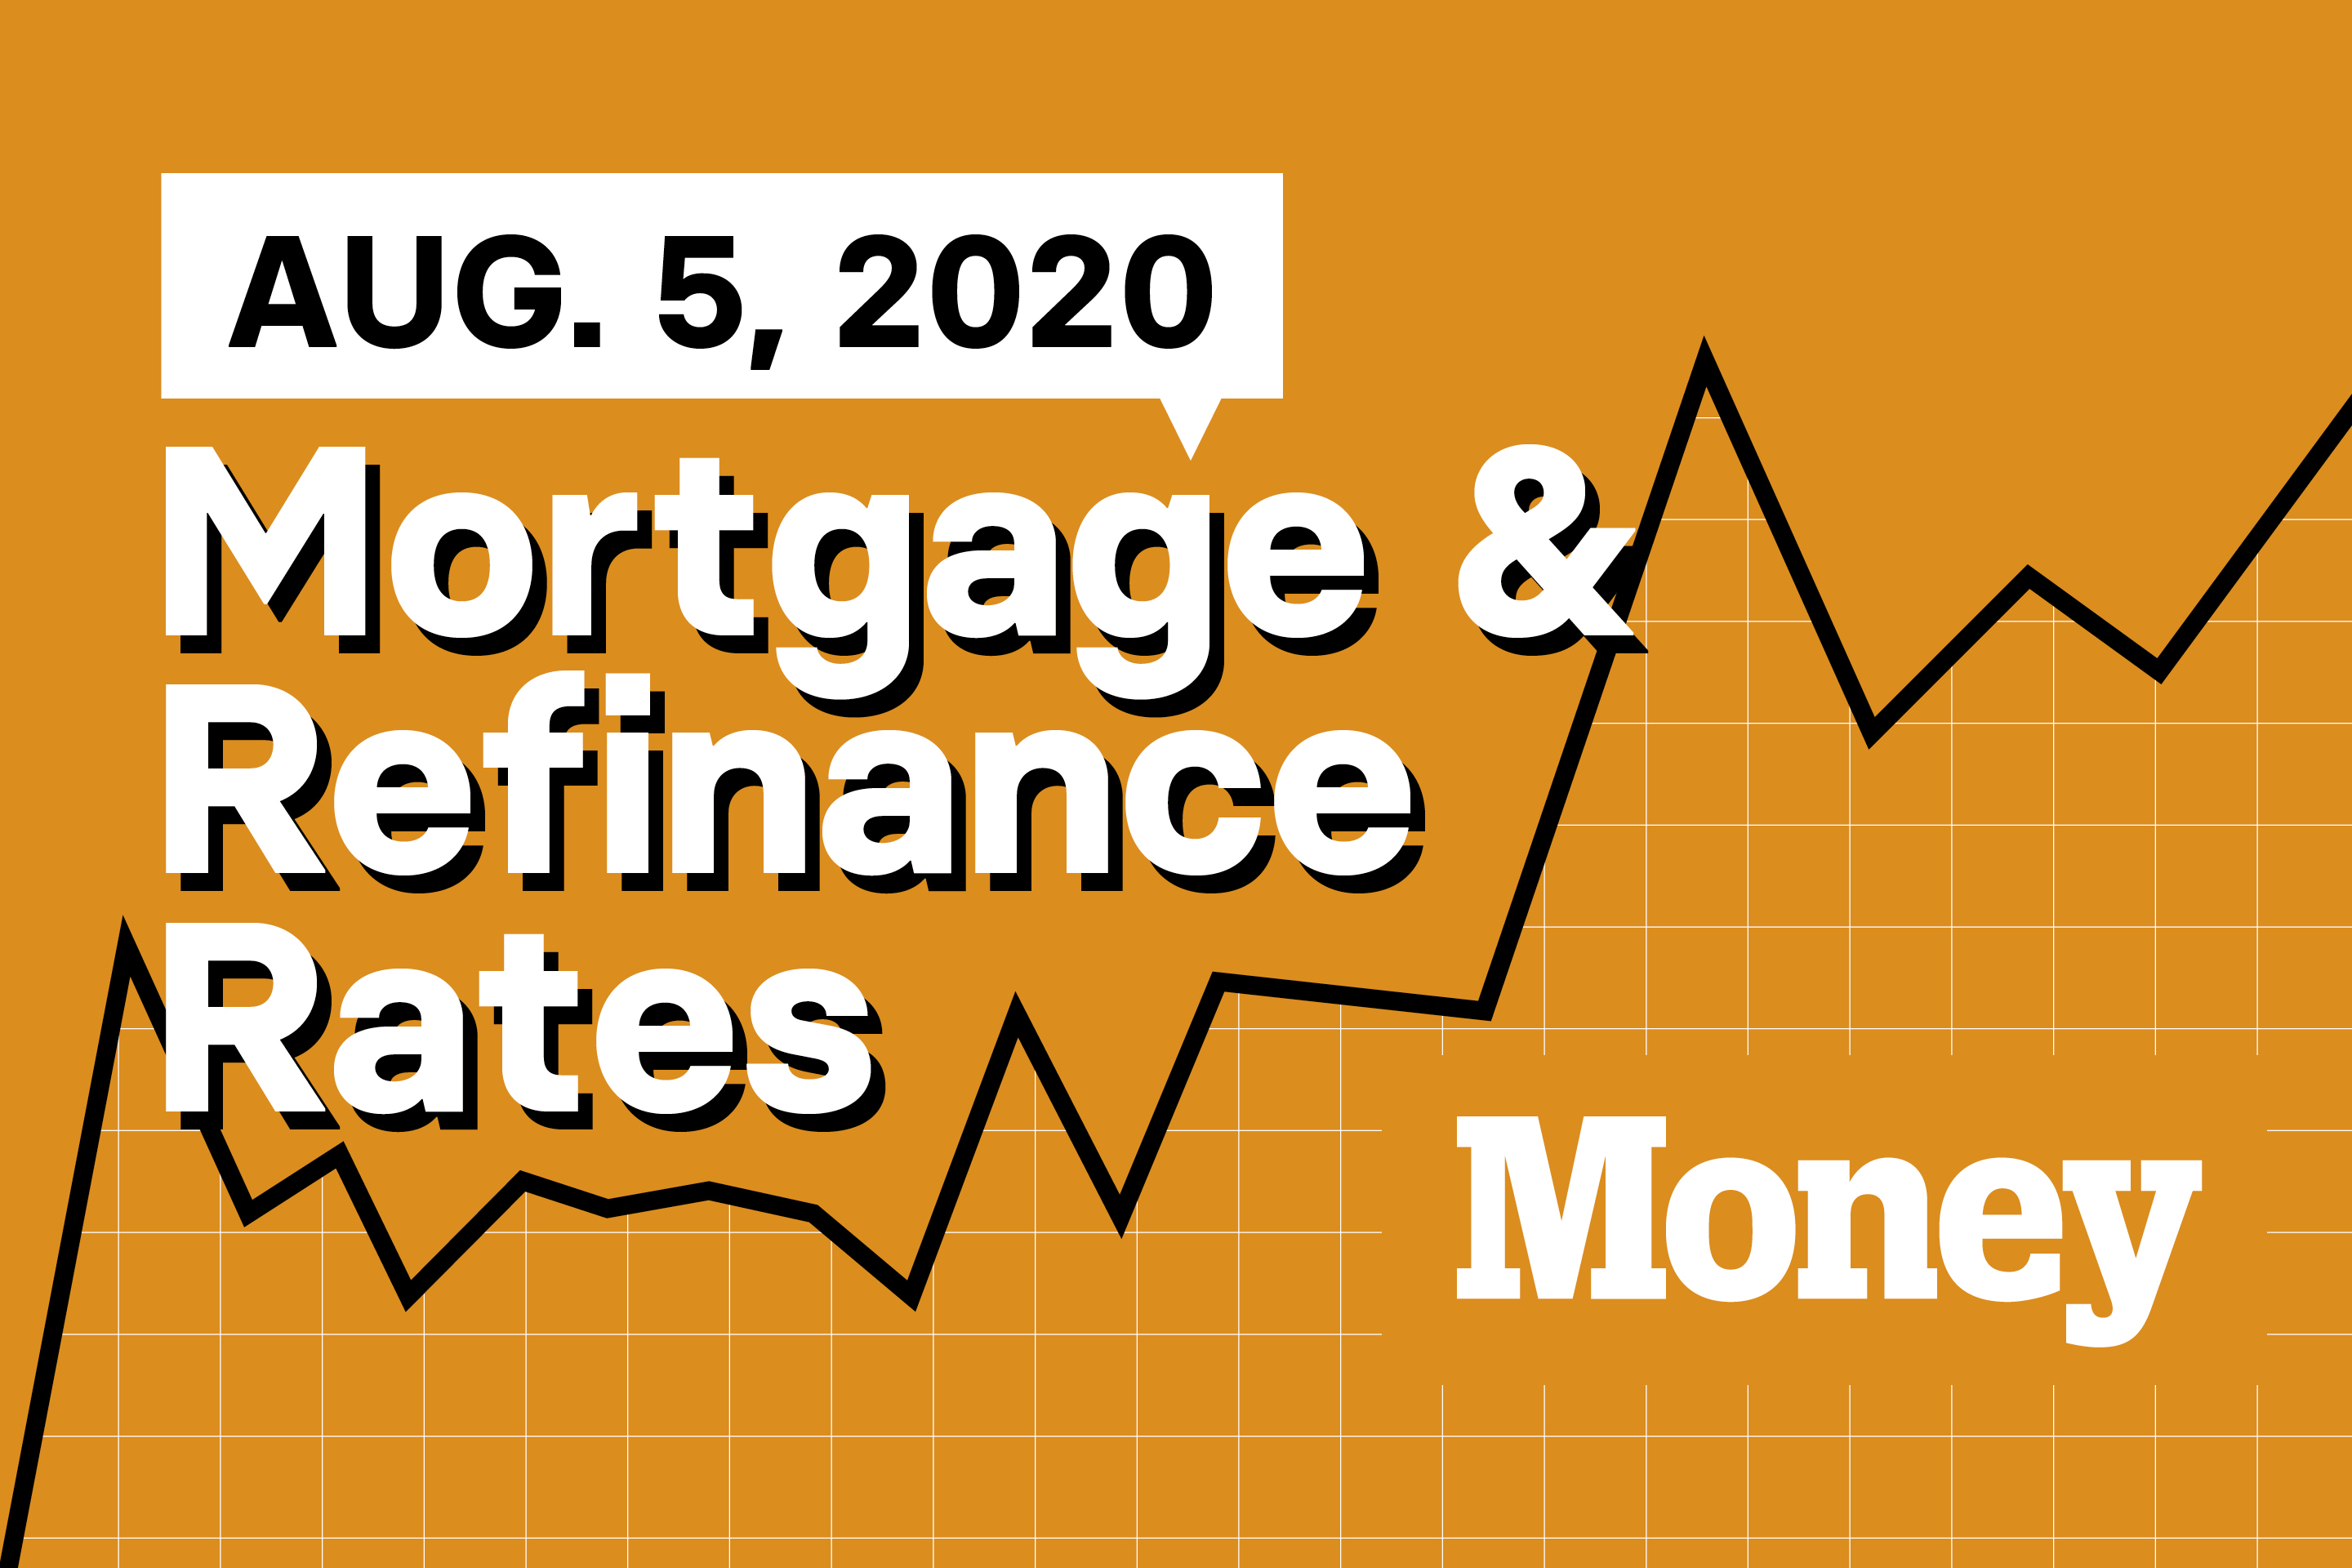 Today s Best Mortgage amp Refinance Rates for August 5 2020 Money